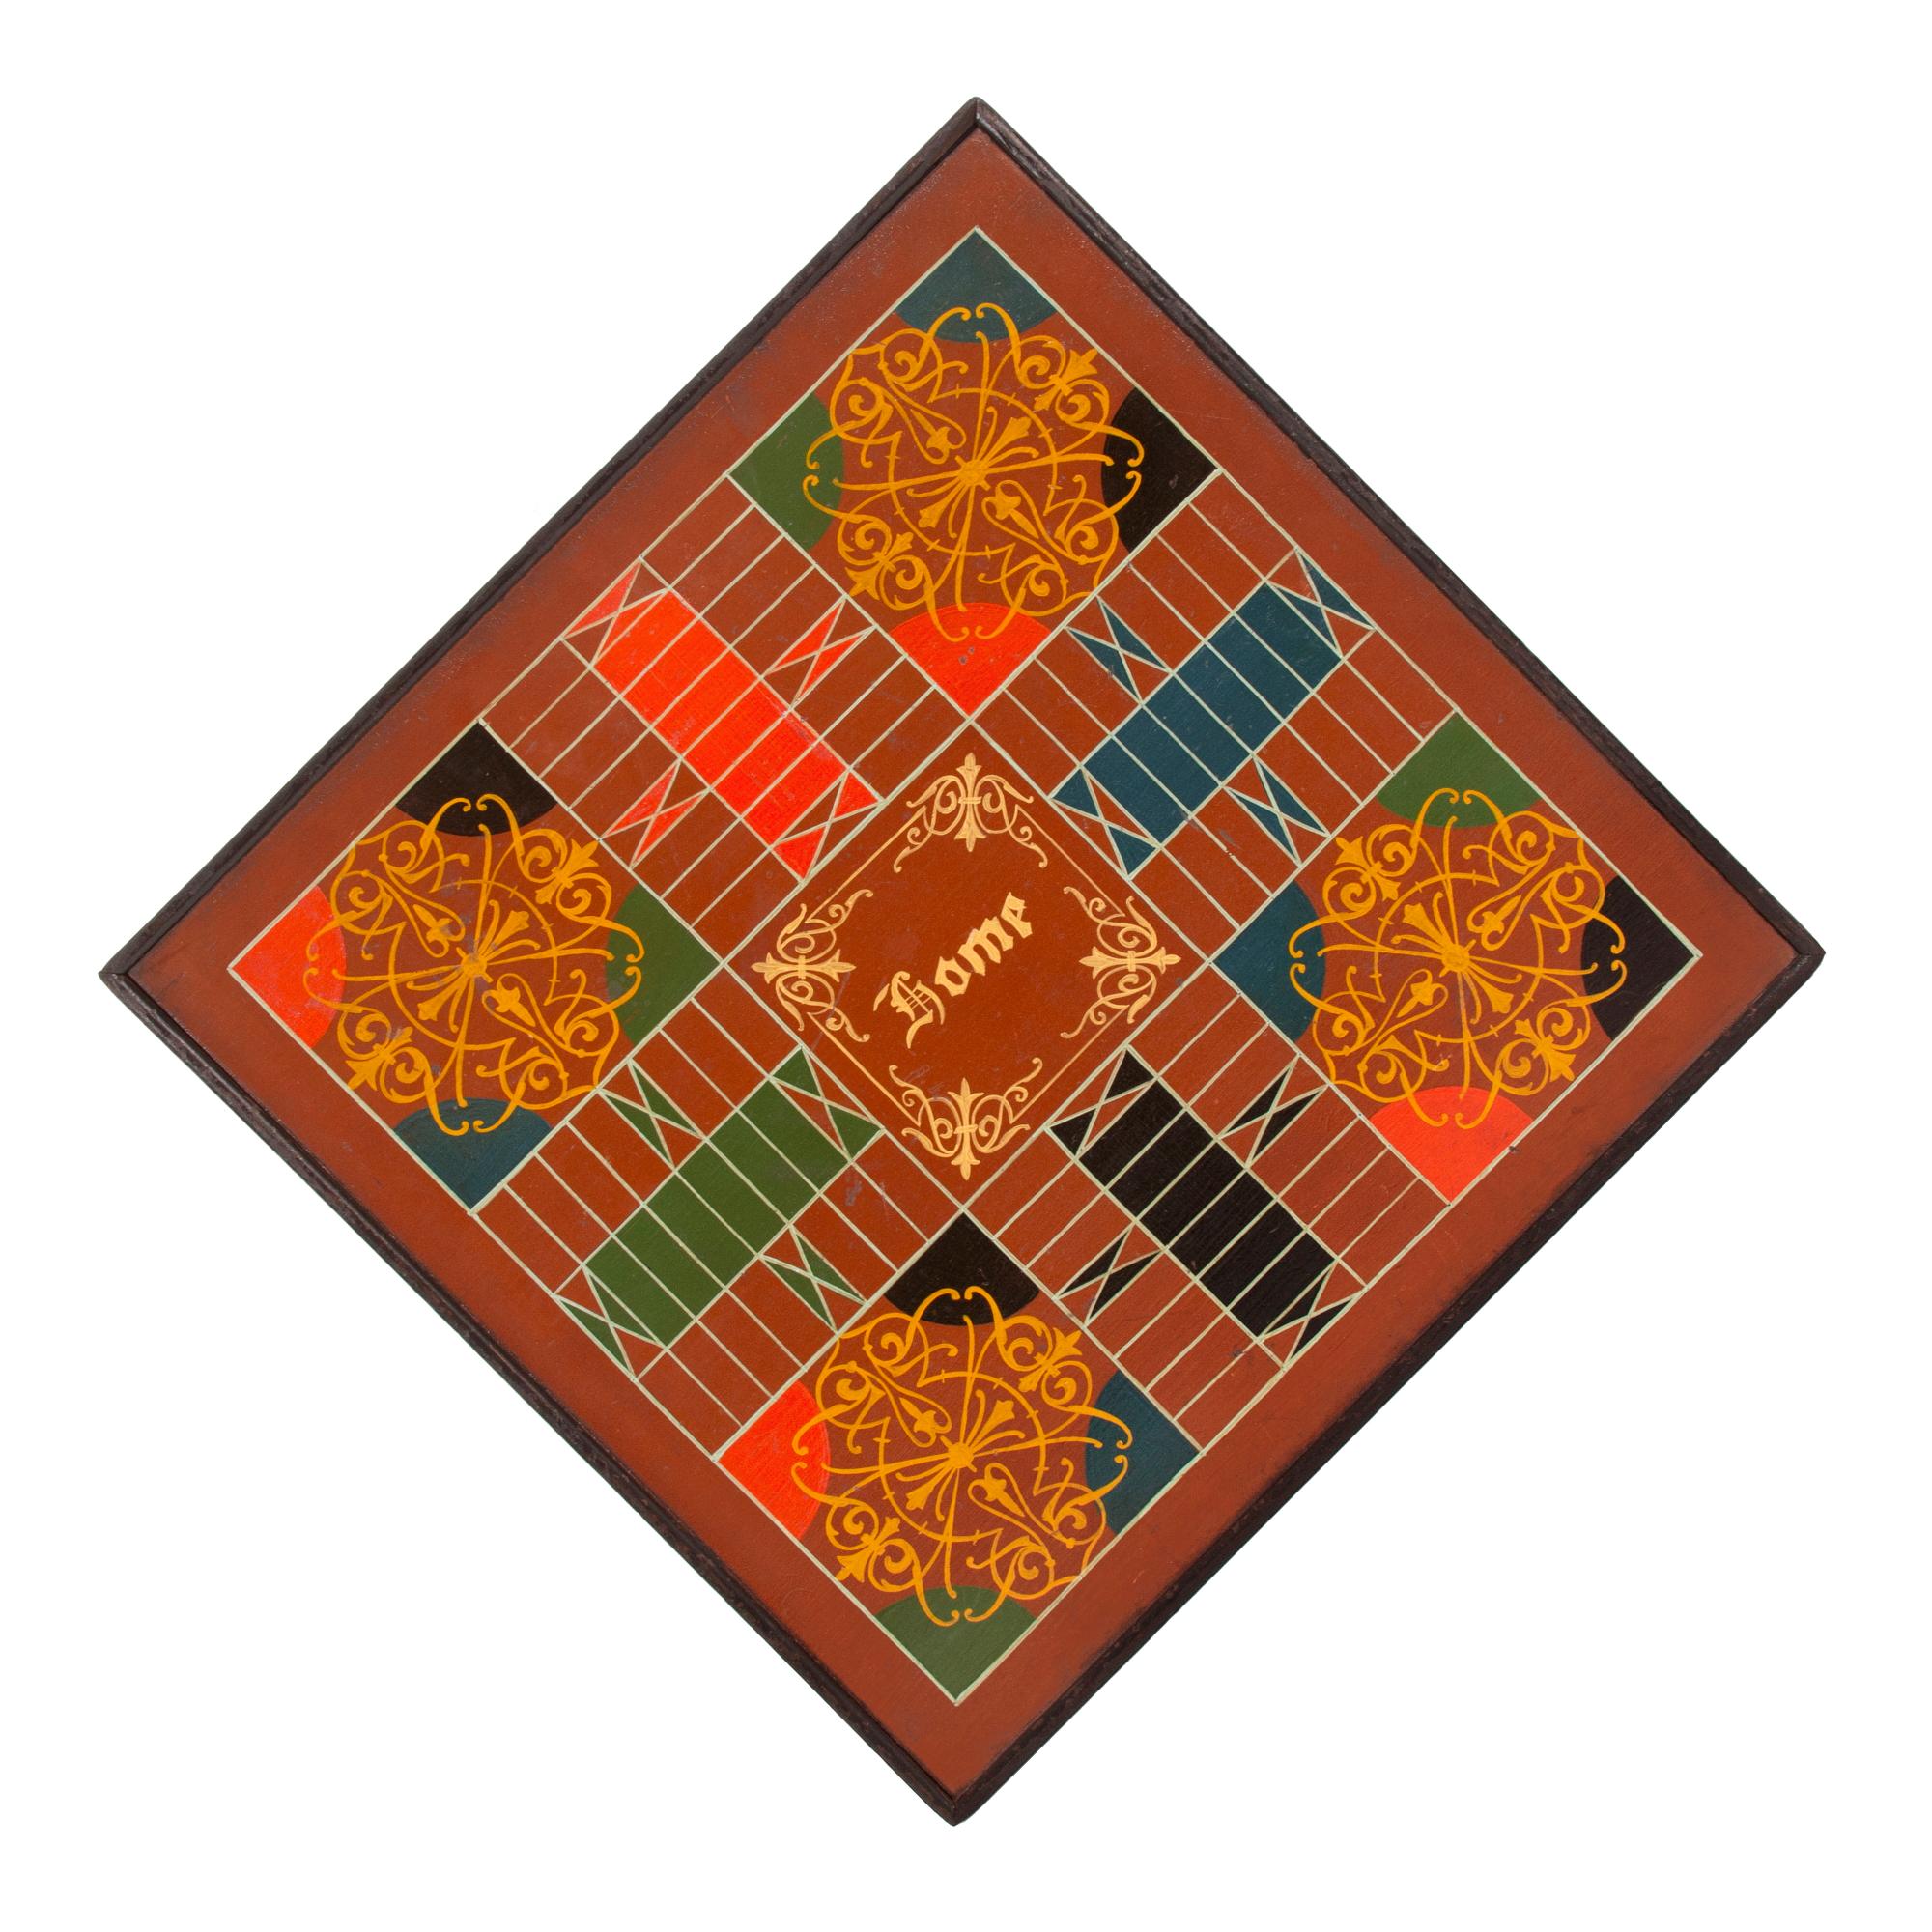 7-COLOR, CARRIAGE-PAINTED, AMERICAN PARCHEESI GAMEBOARD WITH A SPANISH BROWN / TOMATO RED GROUND AND FANCIFUL SCROLLWORK MEDALLIONS, circa 1875

Parcheesi game board, painted in 7 colors on a wooden plank with applied, molded trim. The background is